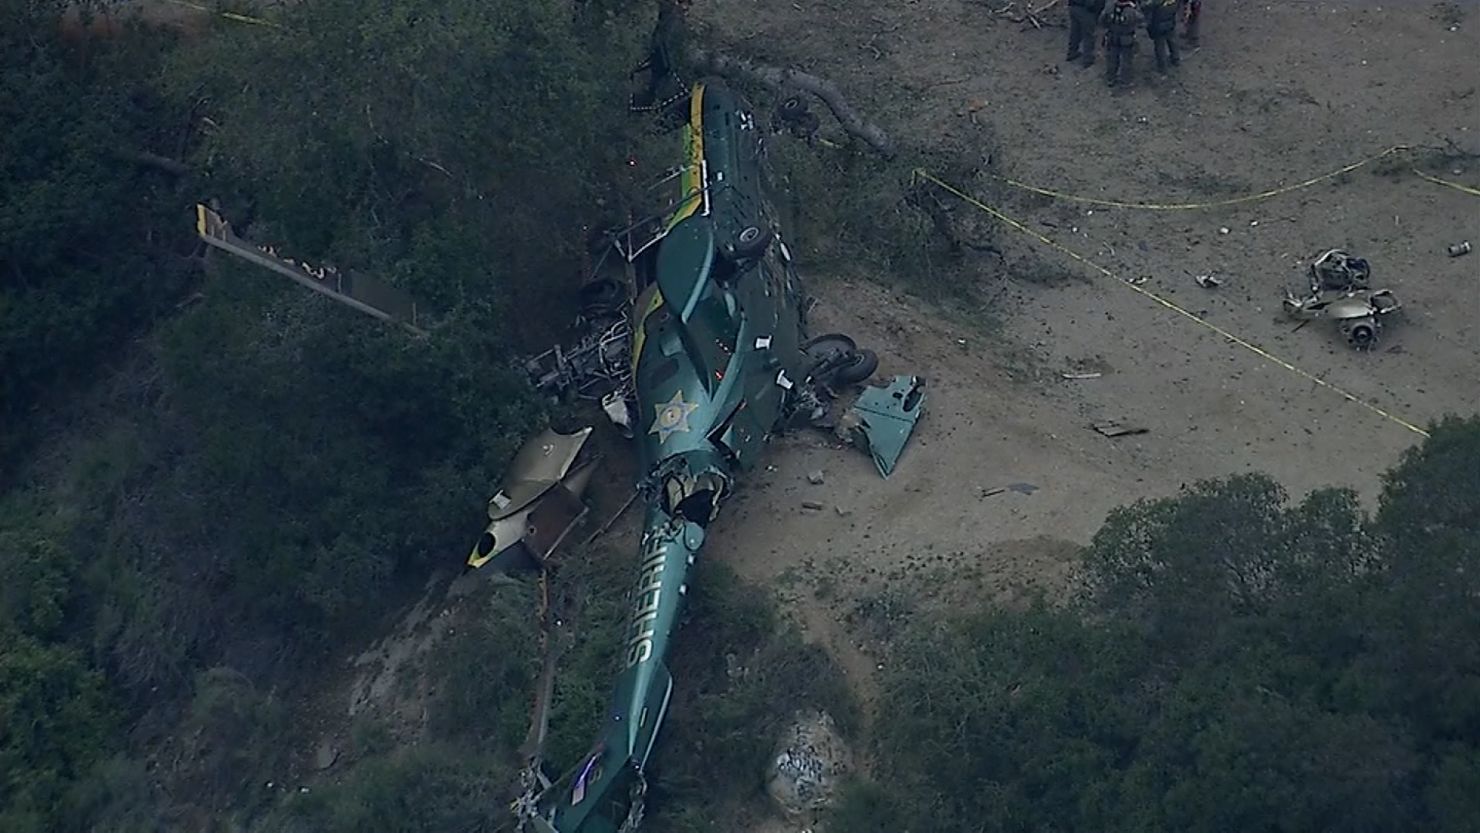 Five people were injured when a Los Angeles County Sheriff's Department aircraft crashed Saturday.